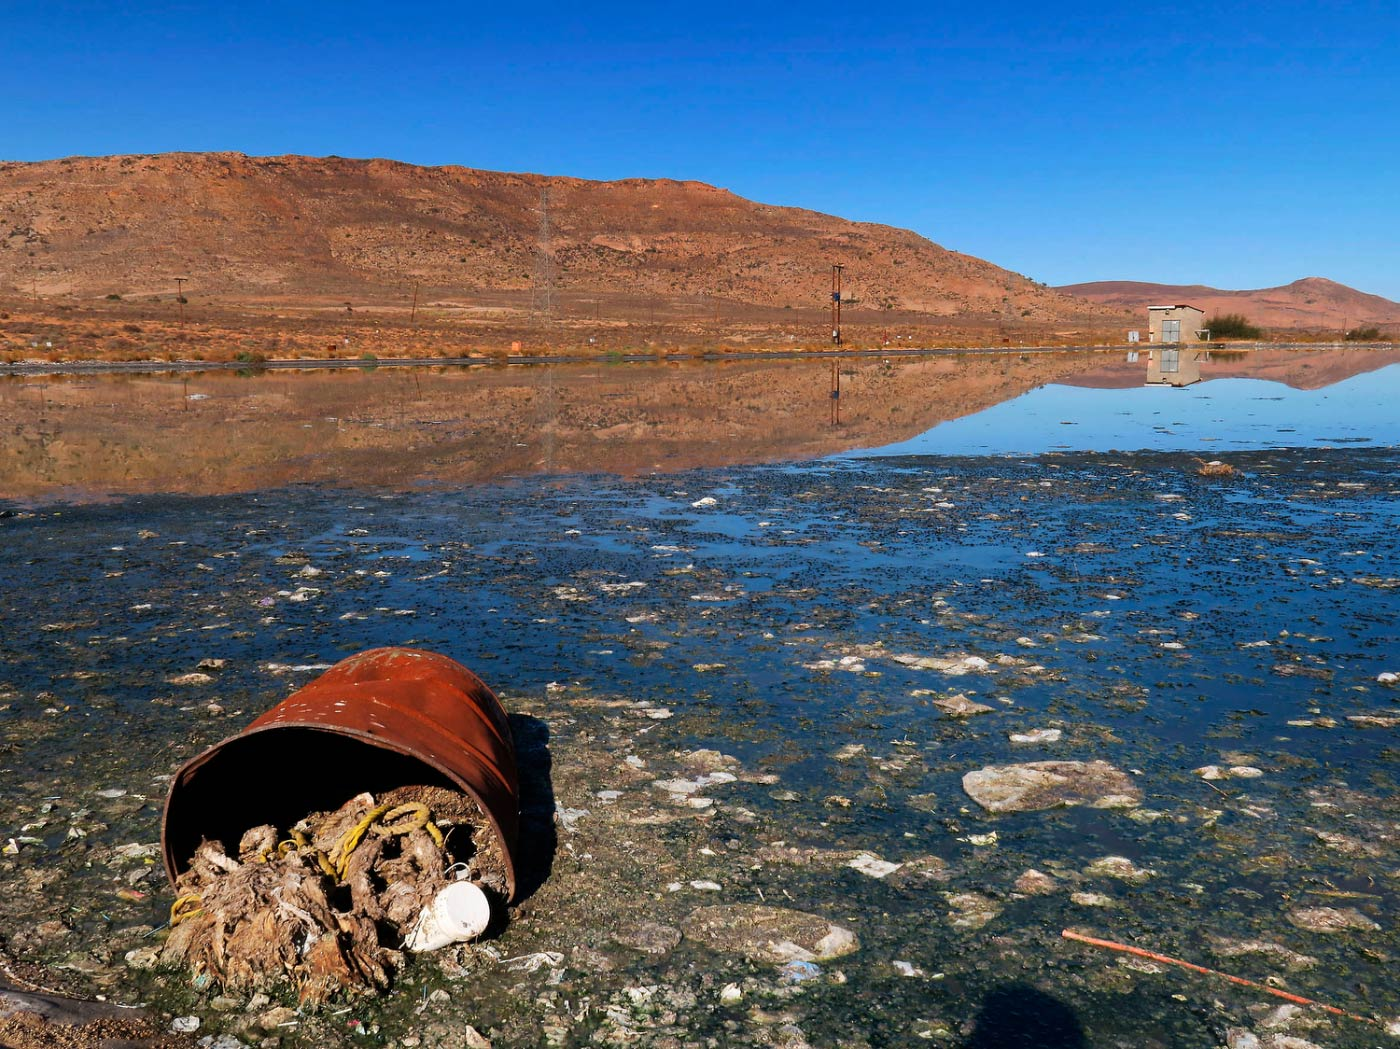 'A Tsunami of Human Waste’ — Half of South Africa’s Sewage Treatment Works Are Failing